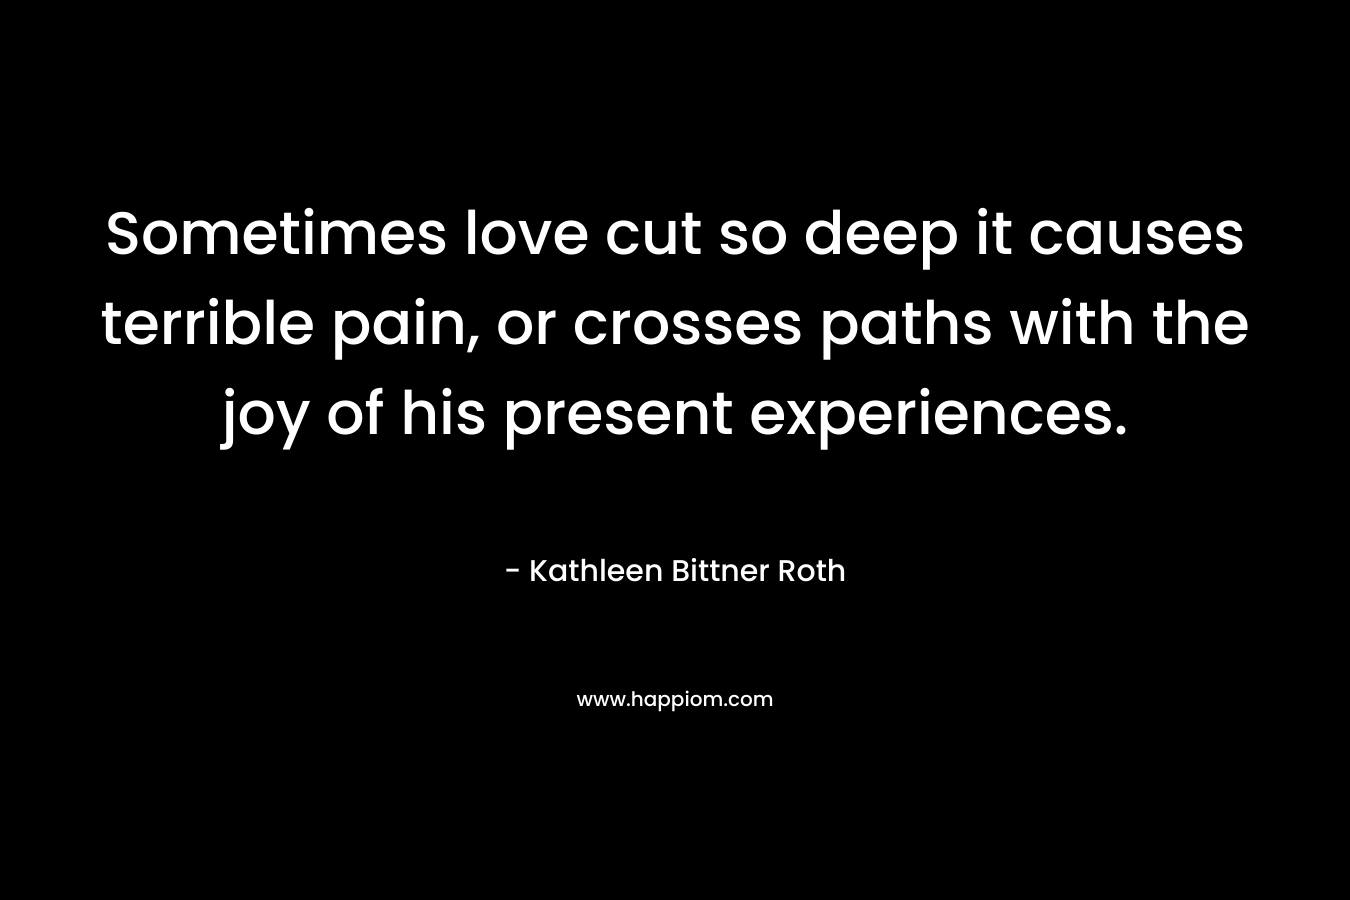 Sometimes love cut so deep it causes terrible pain, or crosses paths with the joy of his present experiences. – Kathleen Bittner Roth